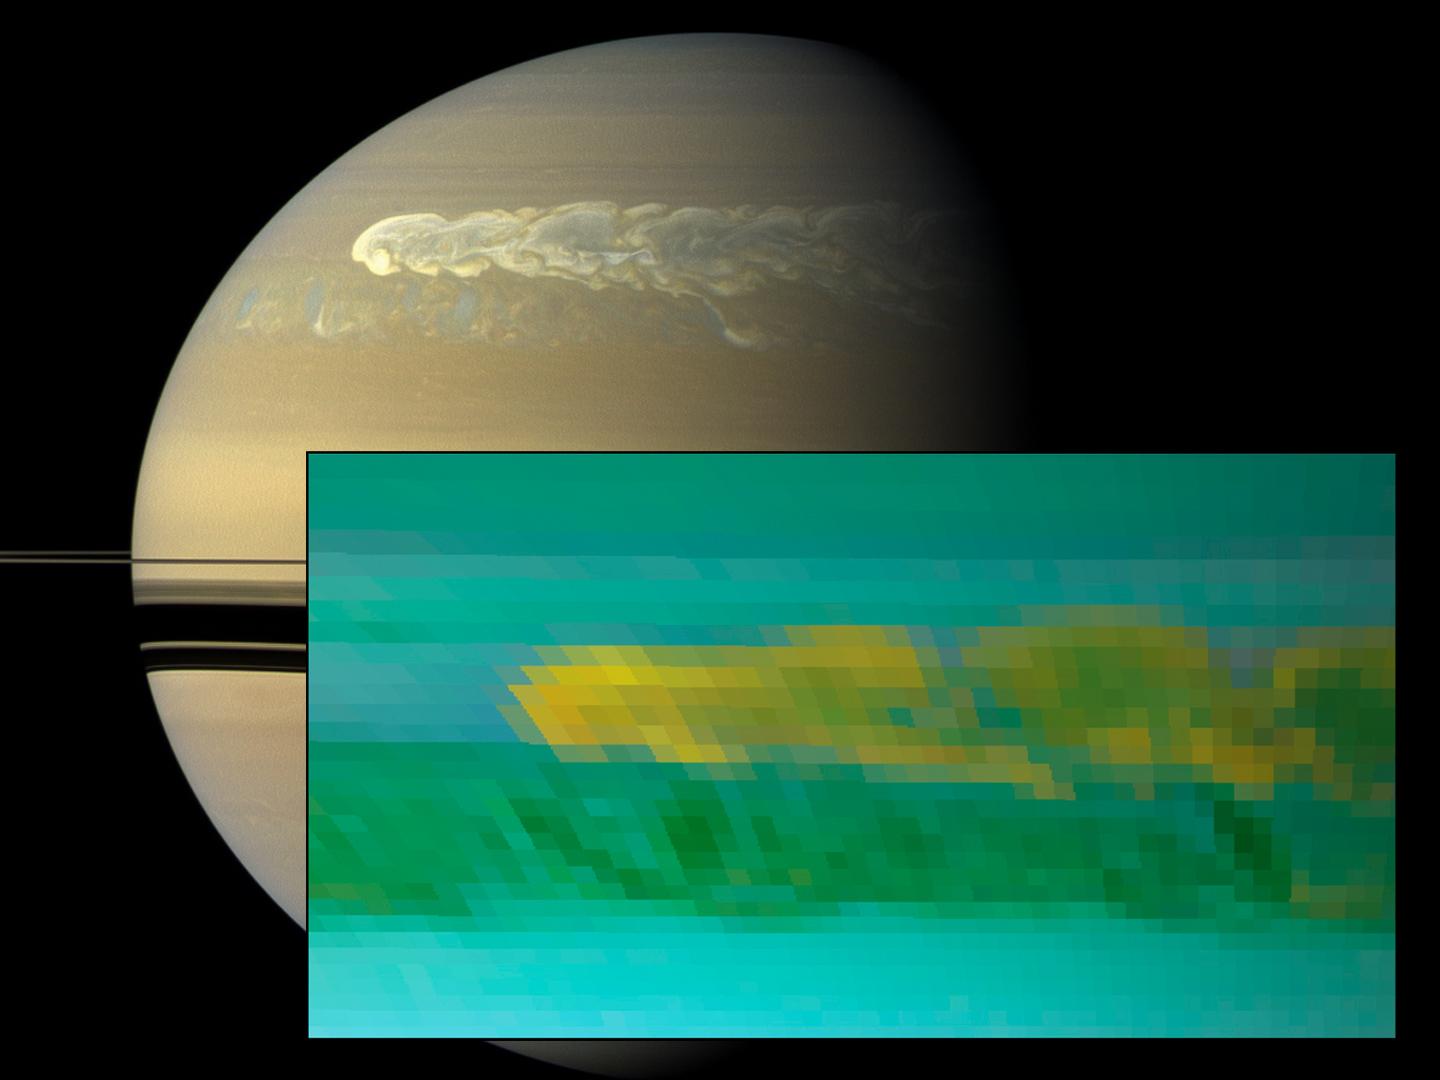 Two images showing the monster Saturn storm